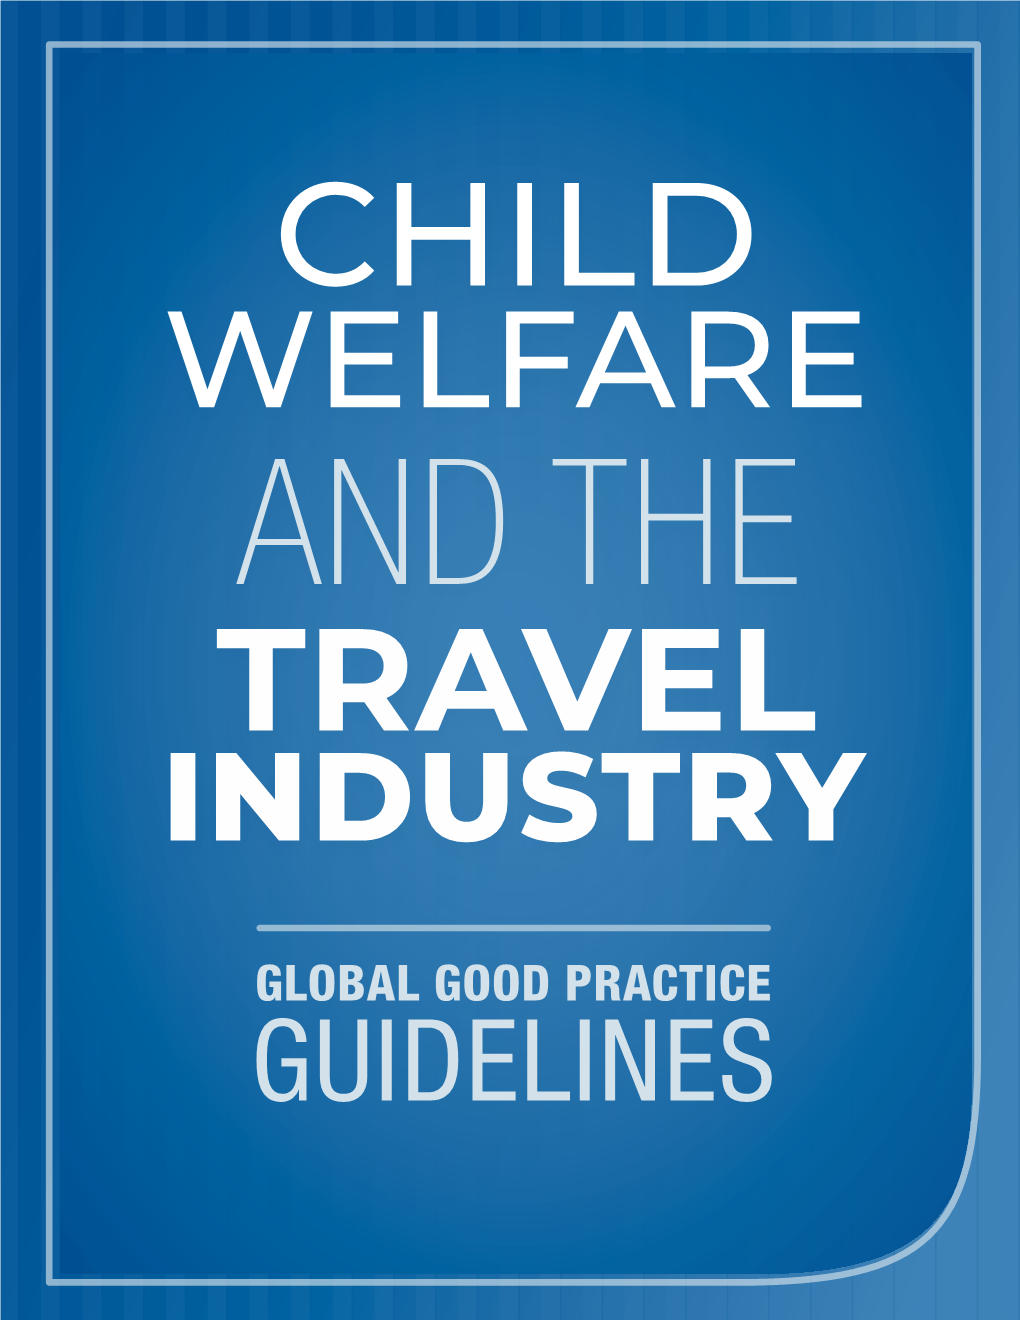 Global Good Practice Guidelines for Child Welfare